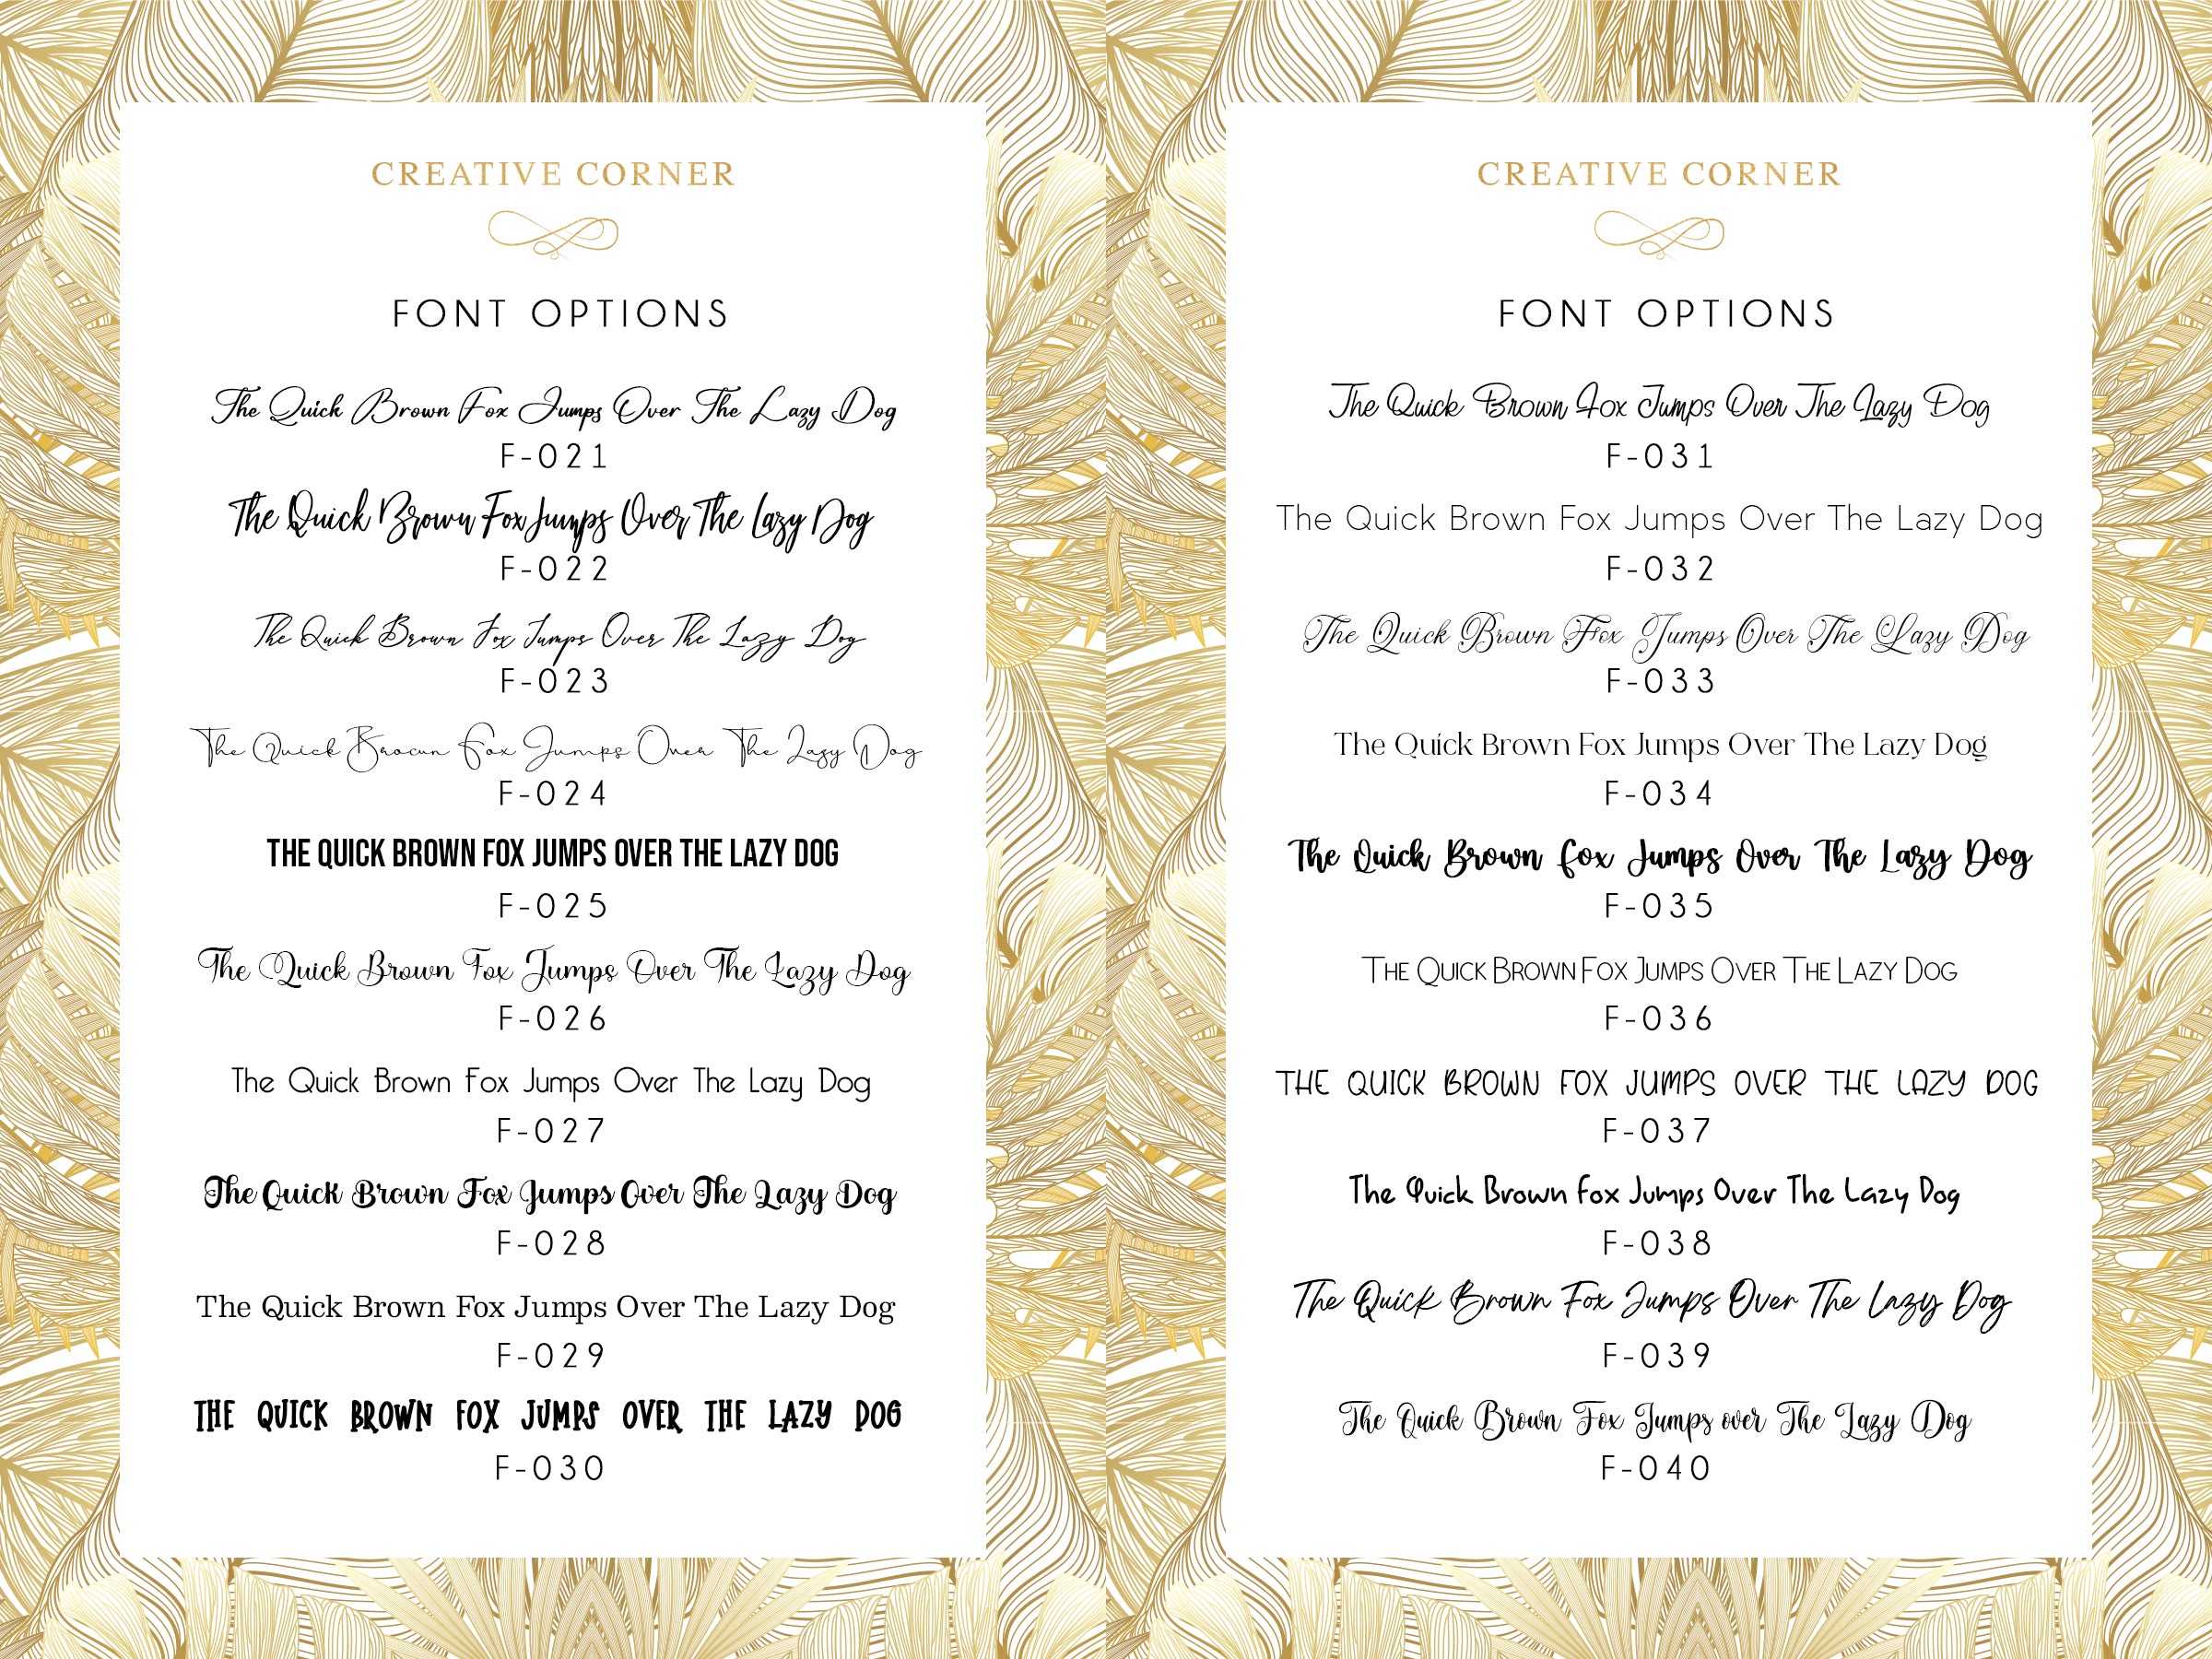 Font Options Page 2